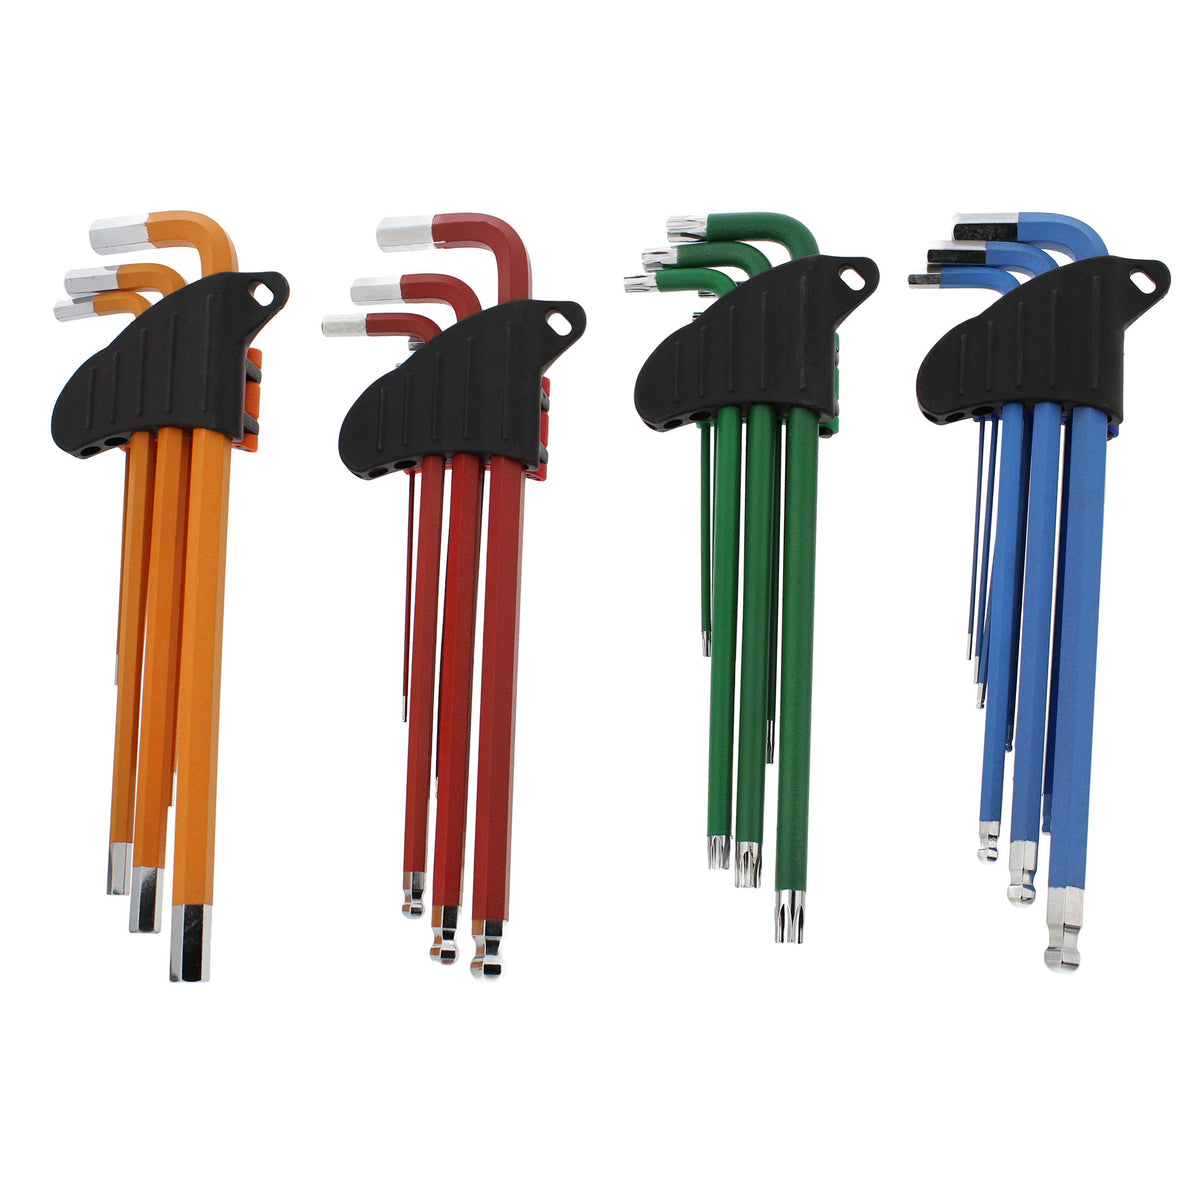 Pocket Allen Key Sets - 4pk Torx, Hex, and Ball End Allen Wrench Kits